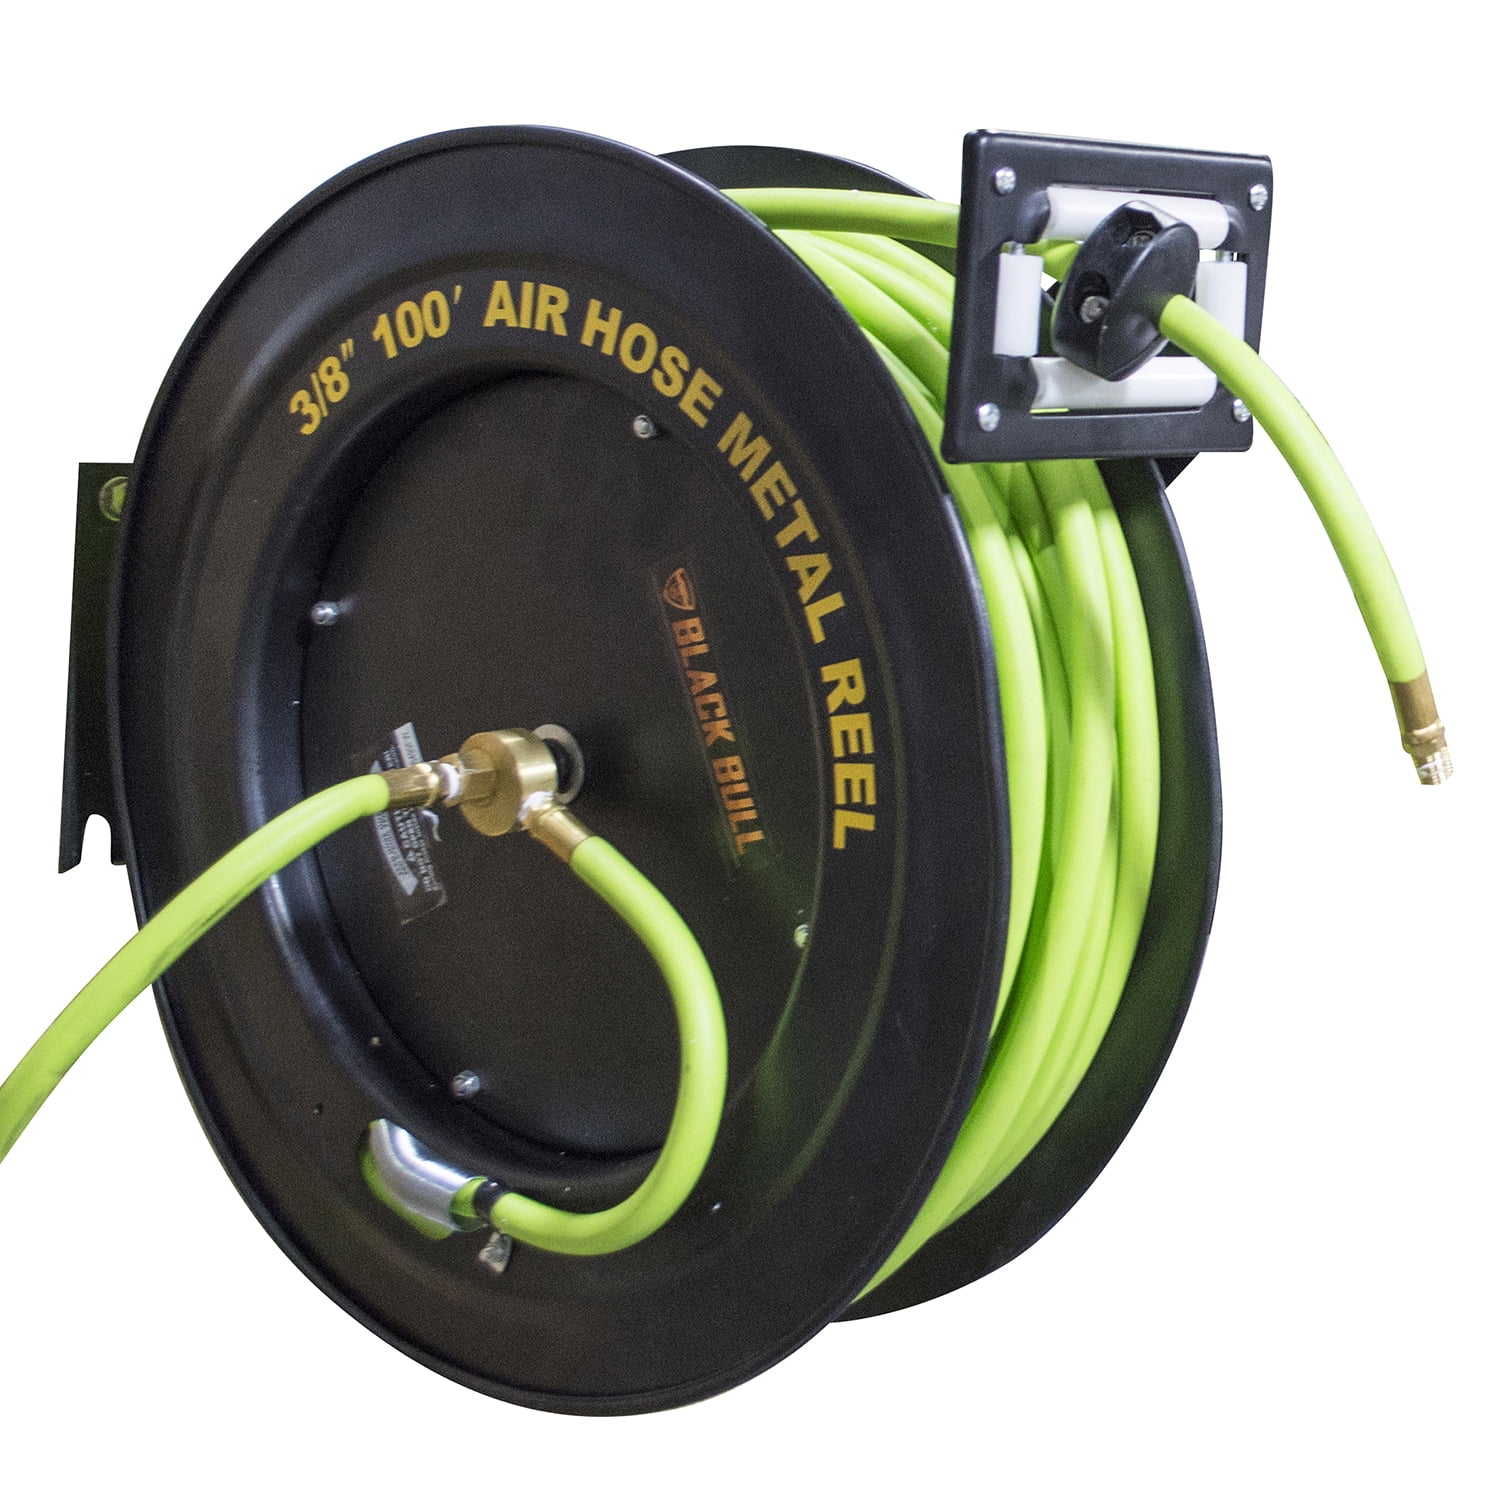 Black Bull 100 Foot Retractable Air Hose Reel with Auto Rewind